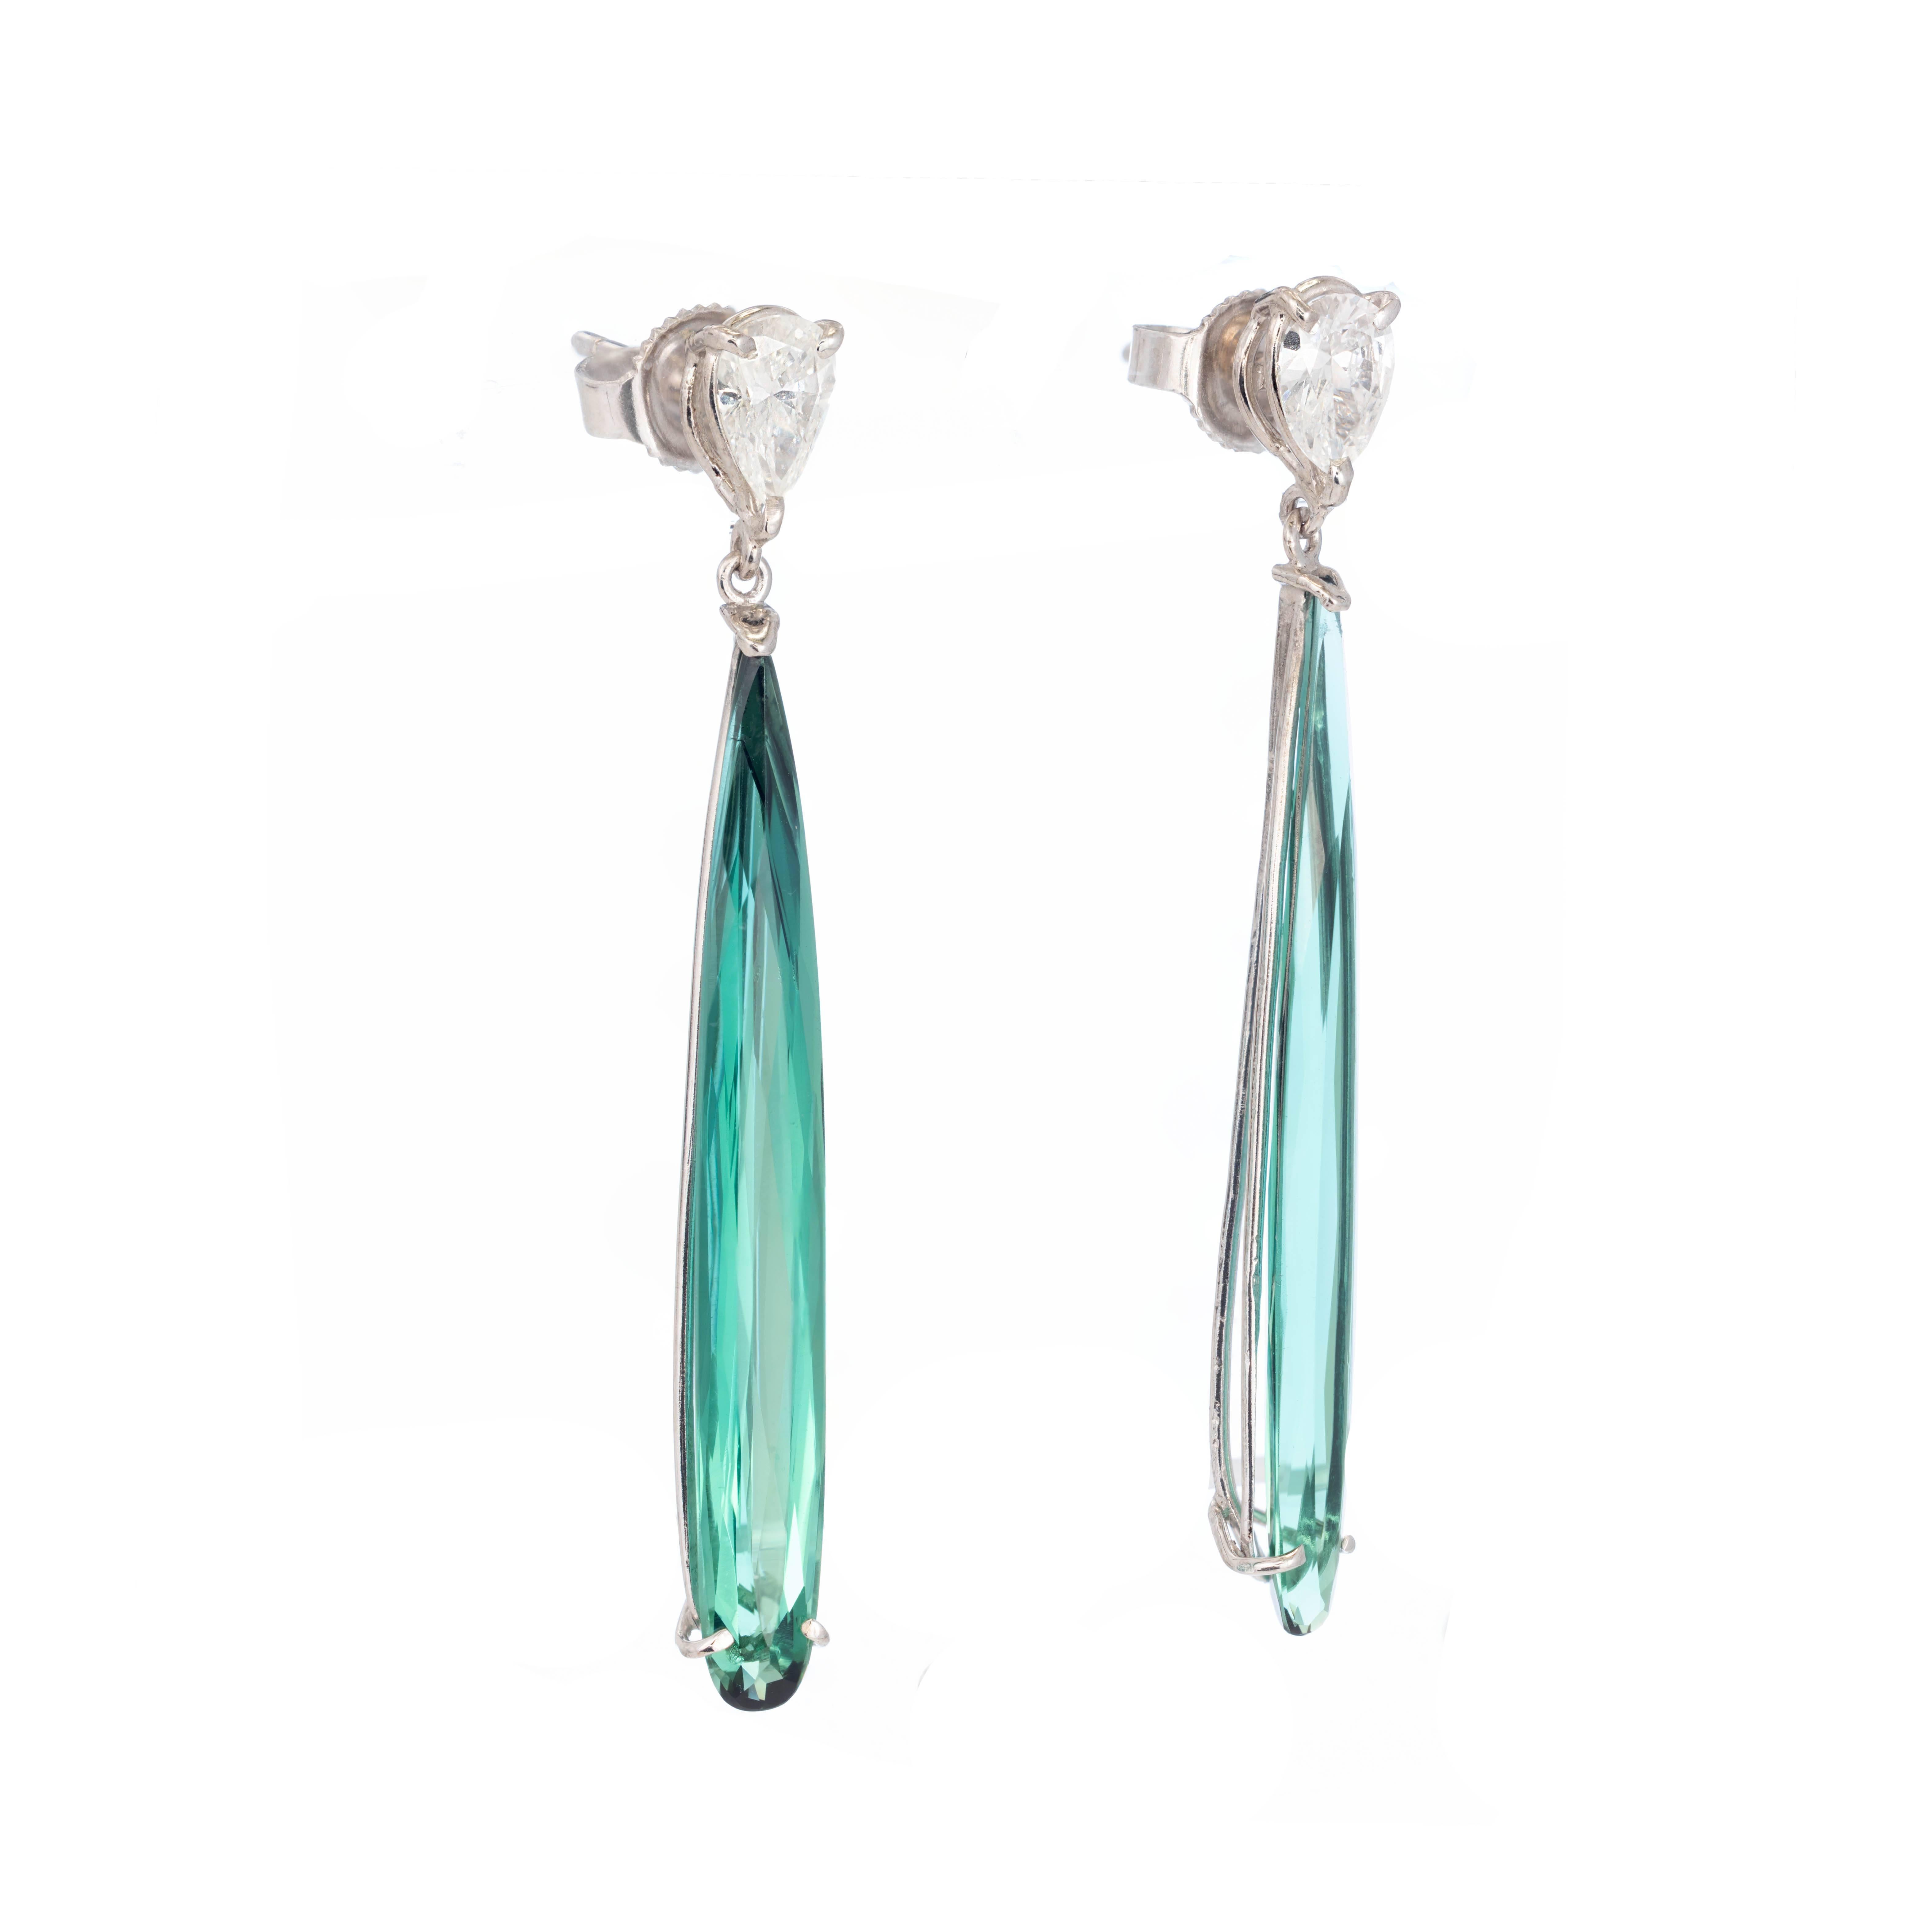 Peter Suchy 5.02 pear shaped tourmaline and diamond dangle earrings. Two green tourmalines with pear shaped diamonds in 18k white gold

2 pear diamonds IJ VS approximate .53 carats
2 pear tourmalines approximate 5.02 carats
18k White Gold
Tested: